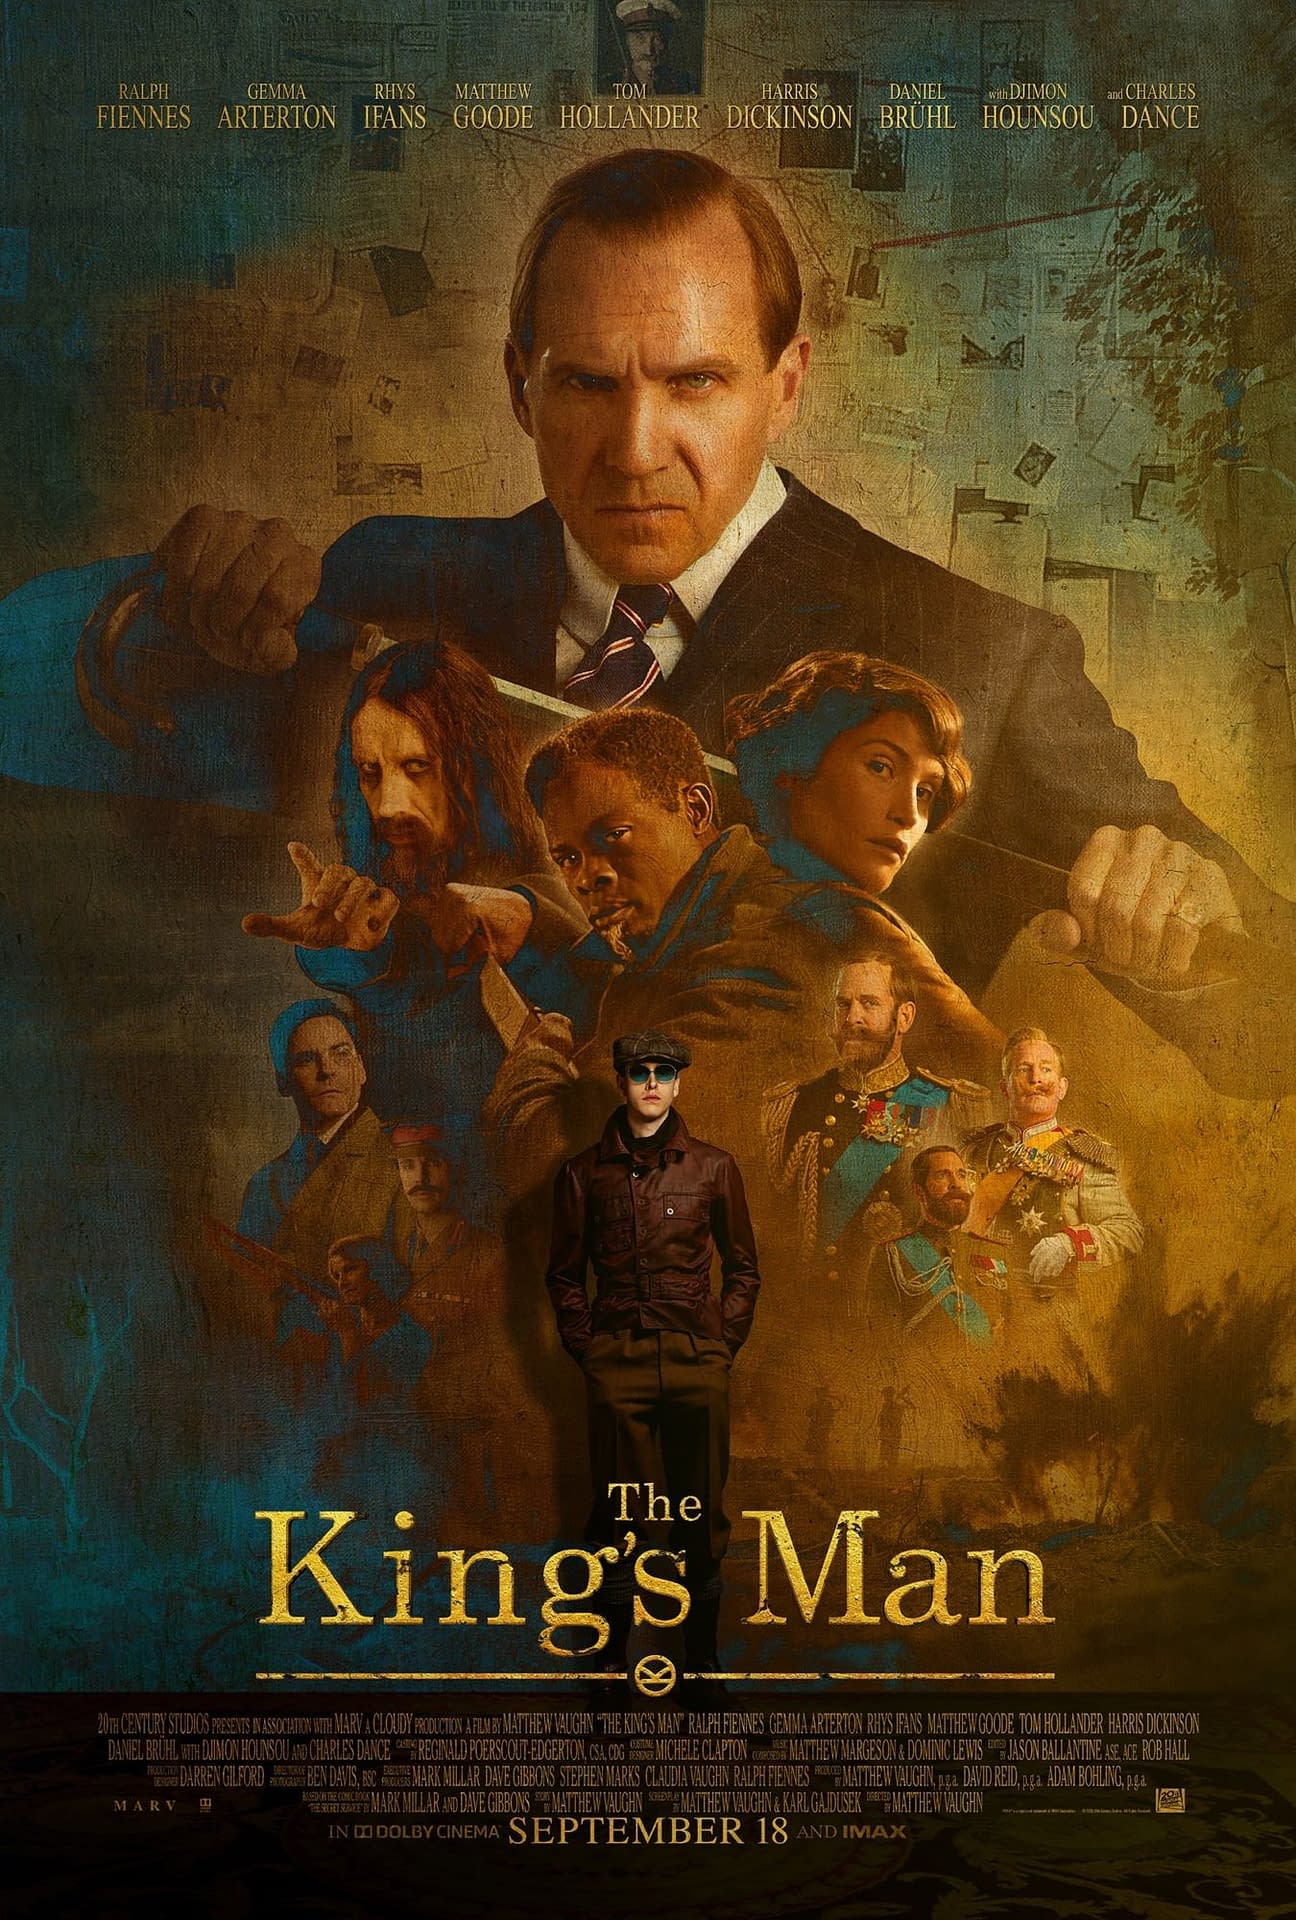 THE KING'S MAN -- A Prequel That Takes Itself Too Seriously -  disappointment media